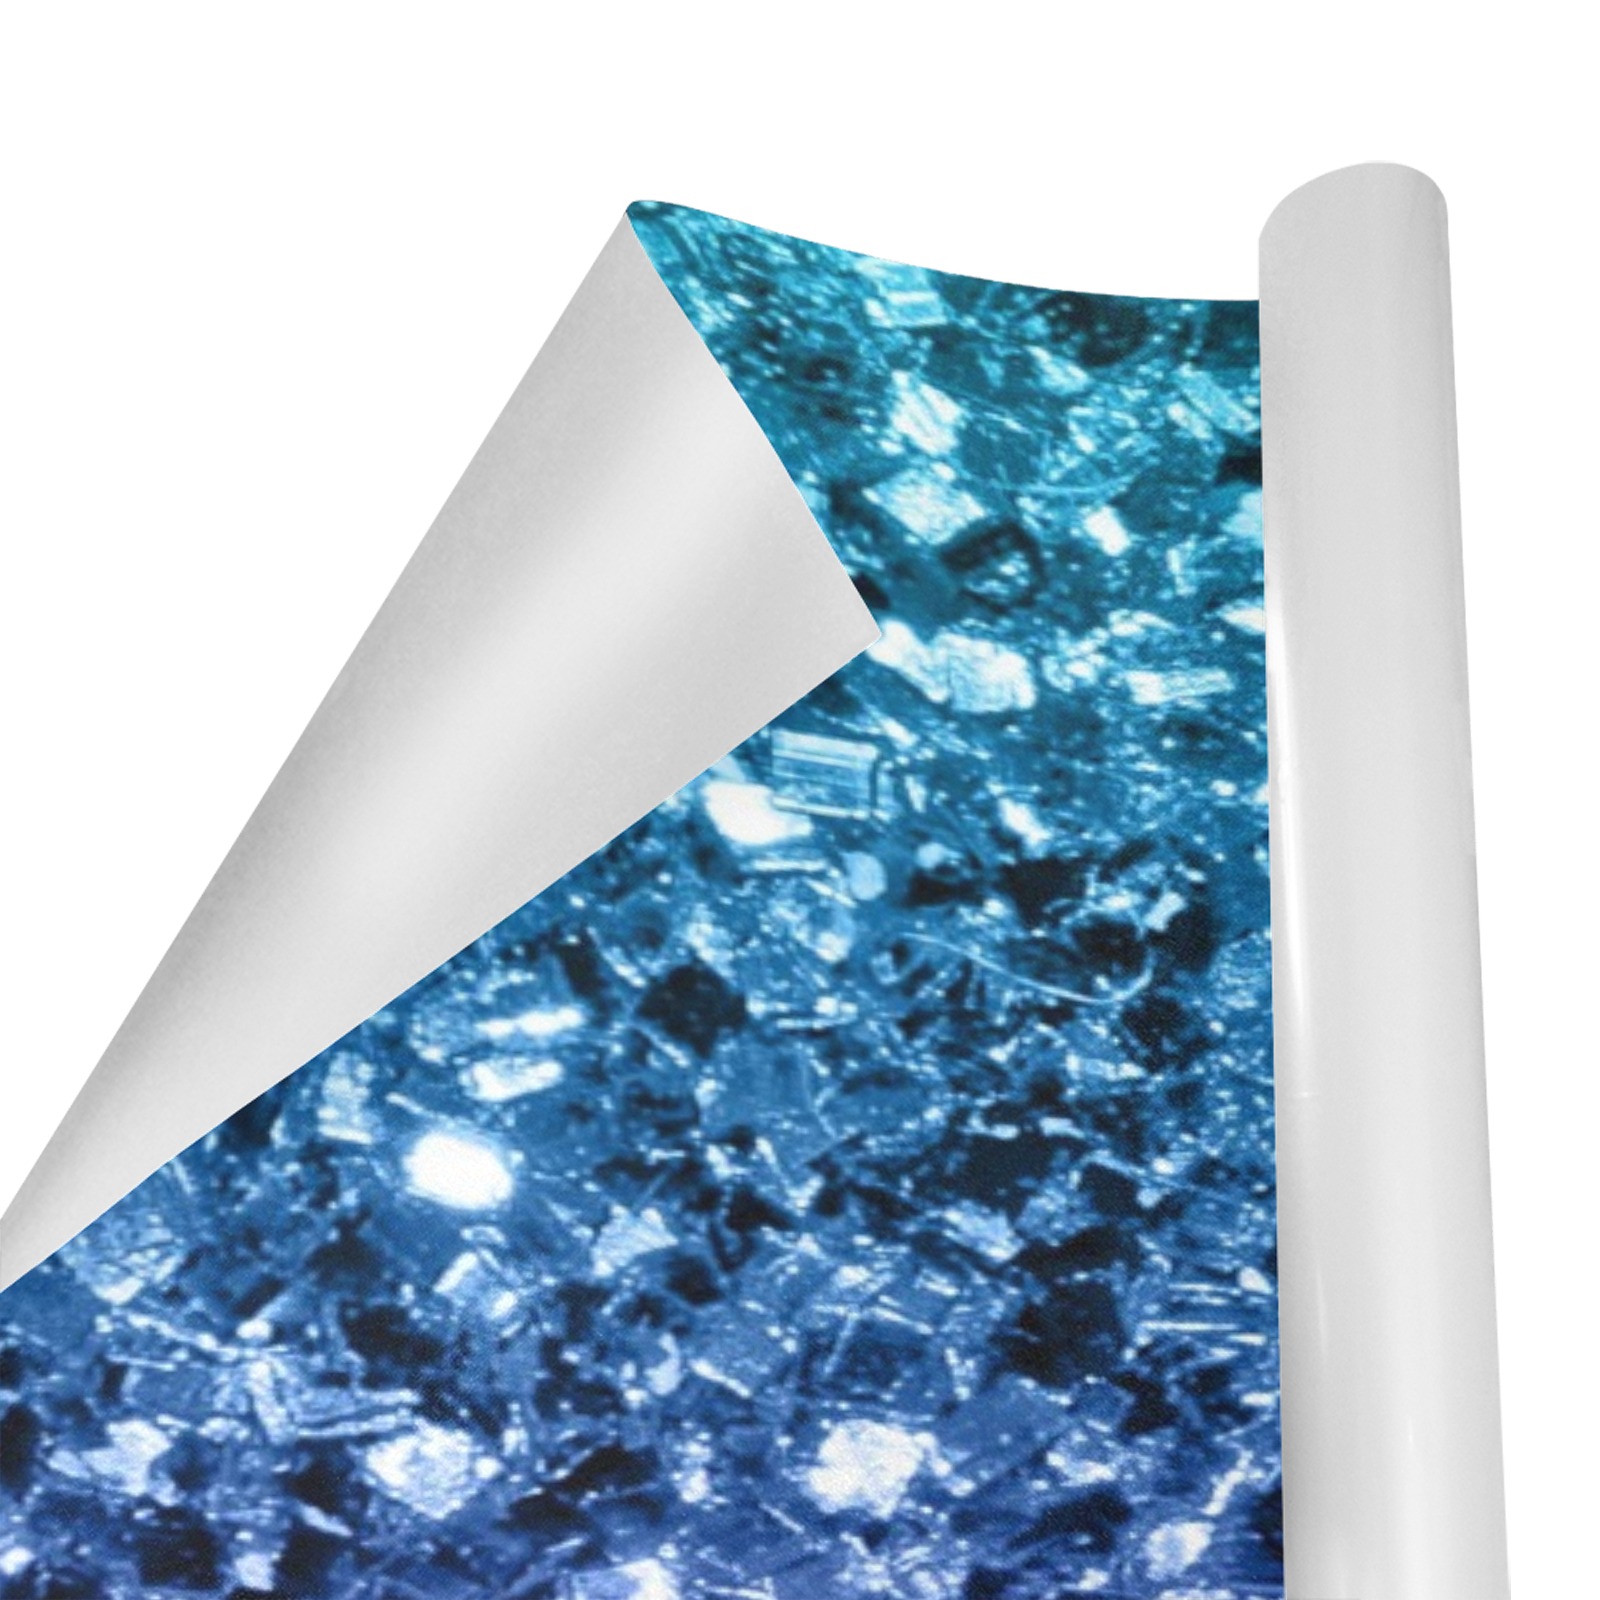 Aqua blue ombre faux glitter sparkles Gift Wrapping Paper 58"x 23" (5 Rolls)